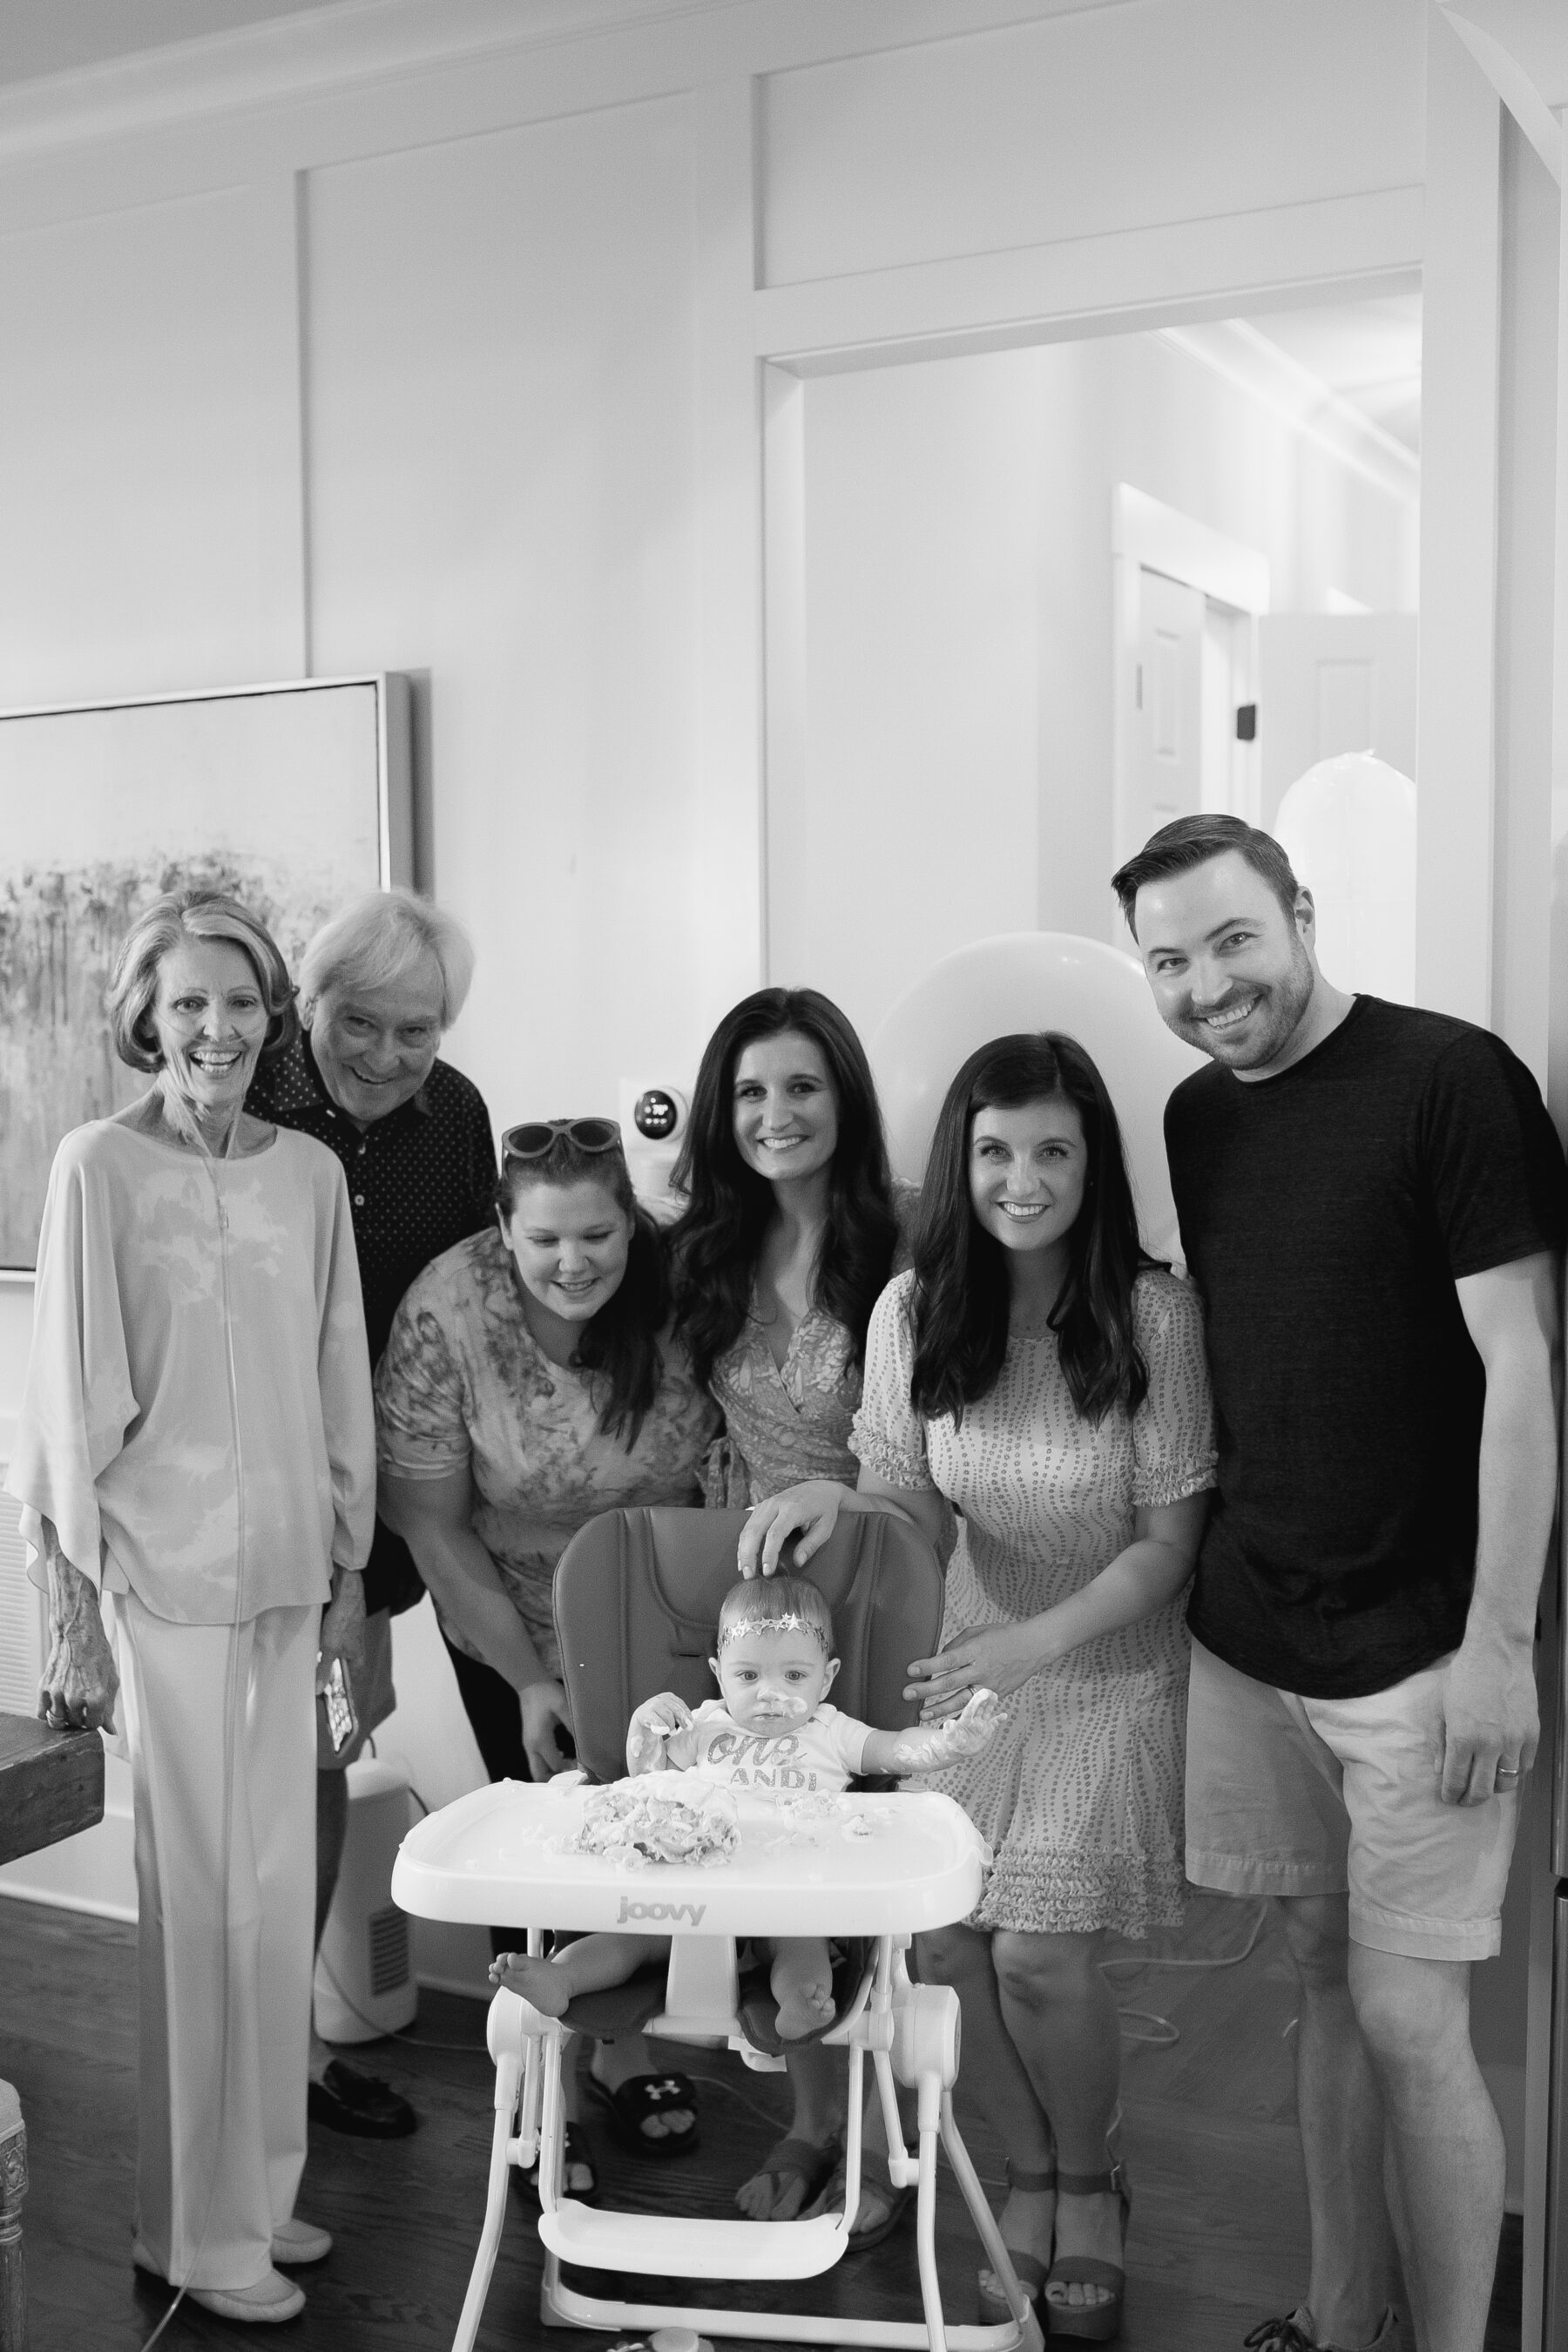 Little Fighter 2nd Nashville Birthday Party featured on Nashville Baby Guide